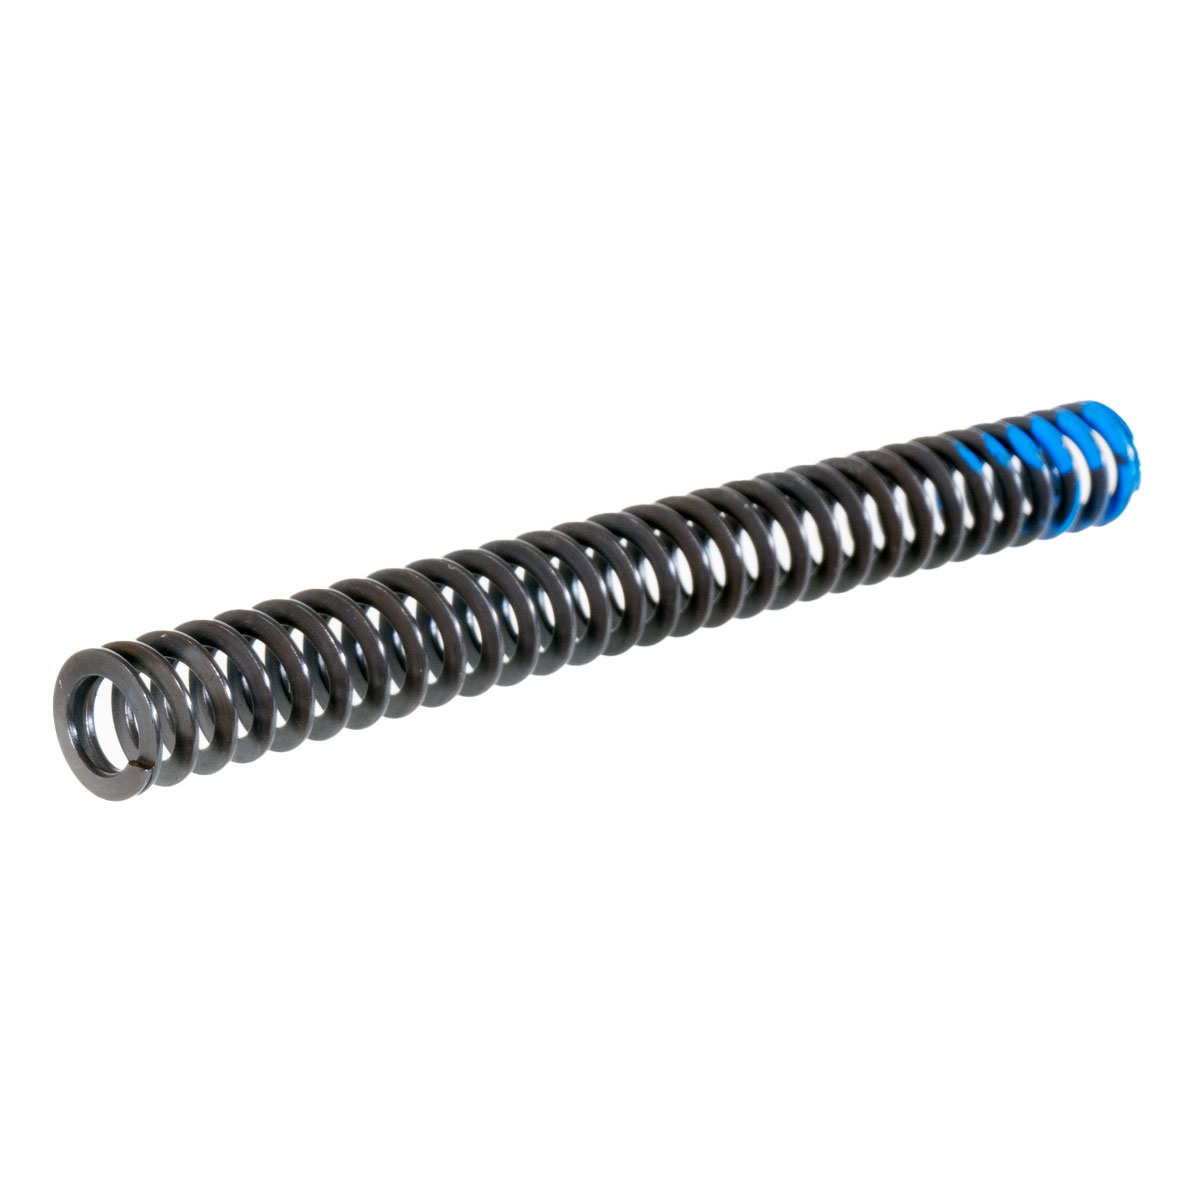 Lone Wolf 13 lb. Reduced Power Recoil Spring for Glock 19